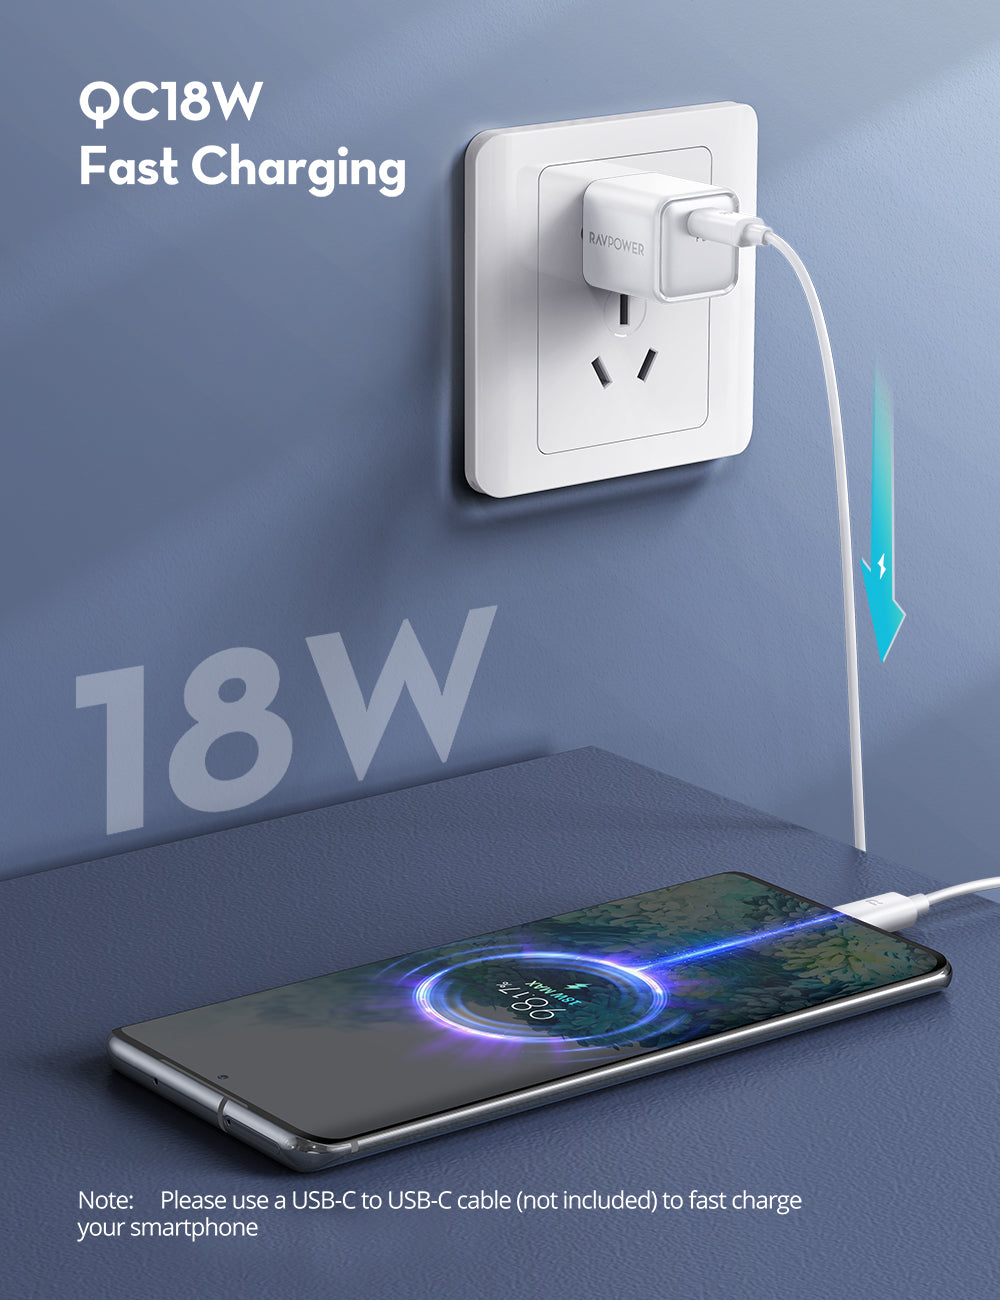 RAVPower 20W USB C PD Wall Charger 2024